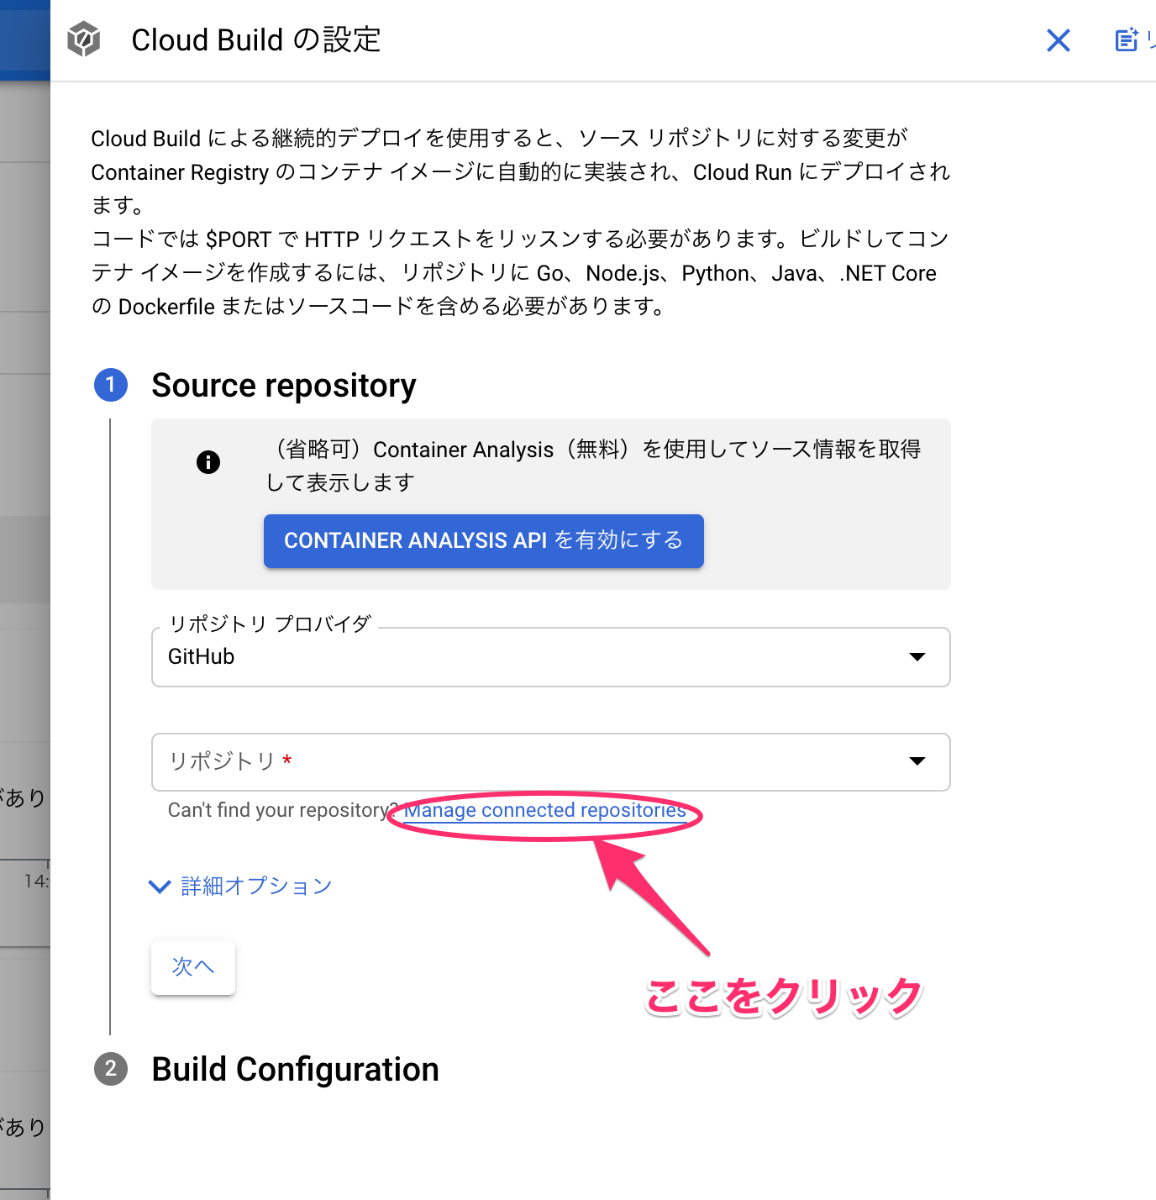 "Manage connected repositories"をクリック